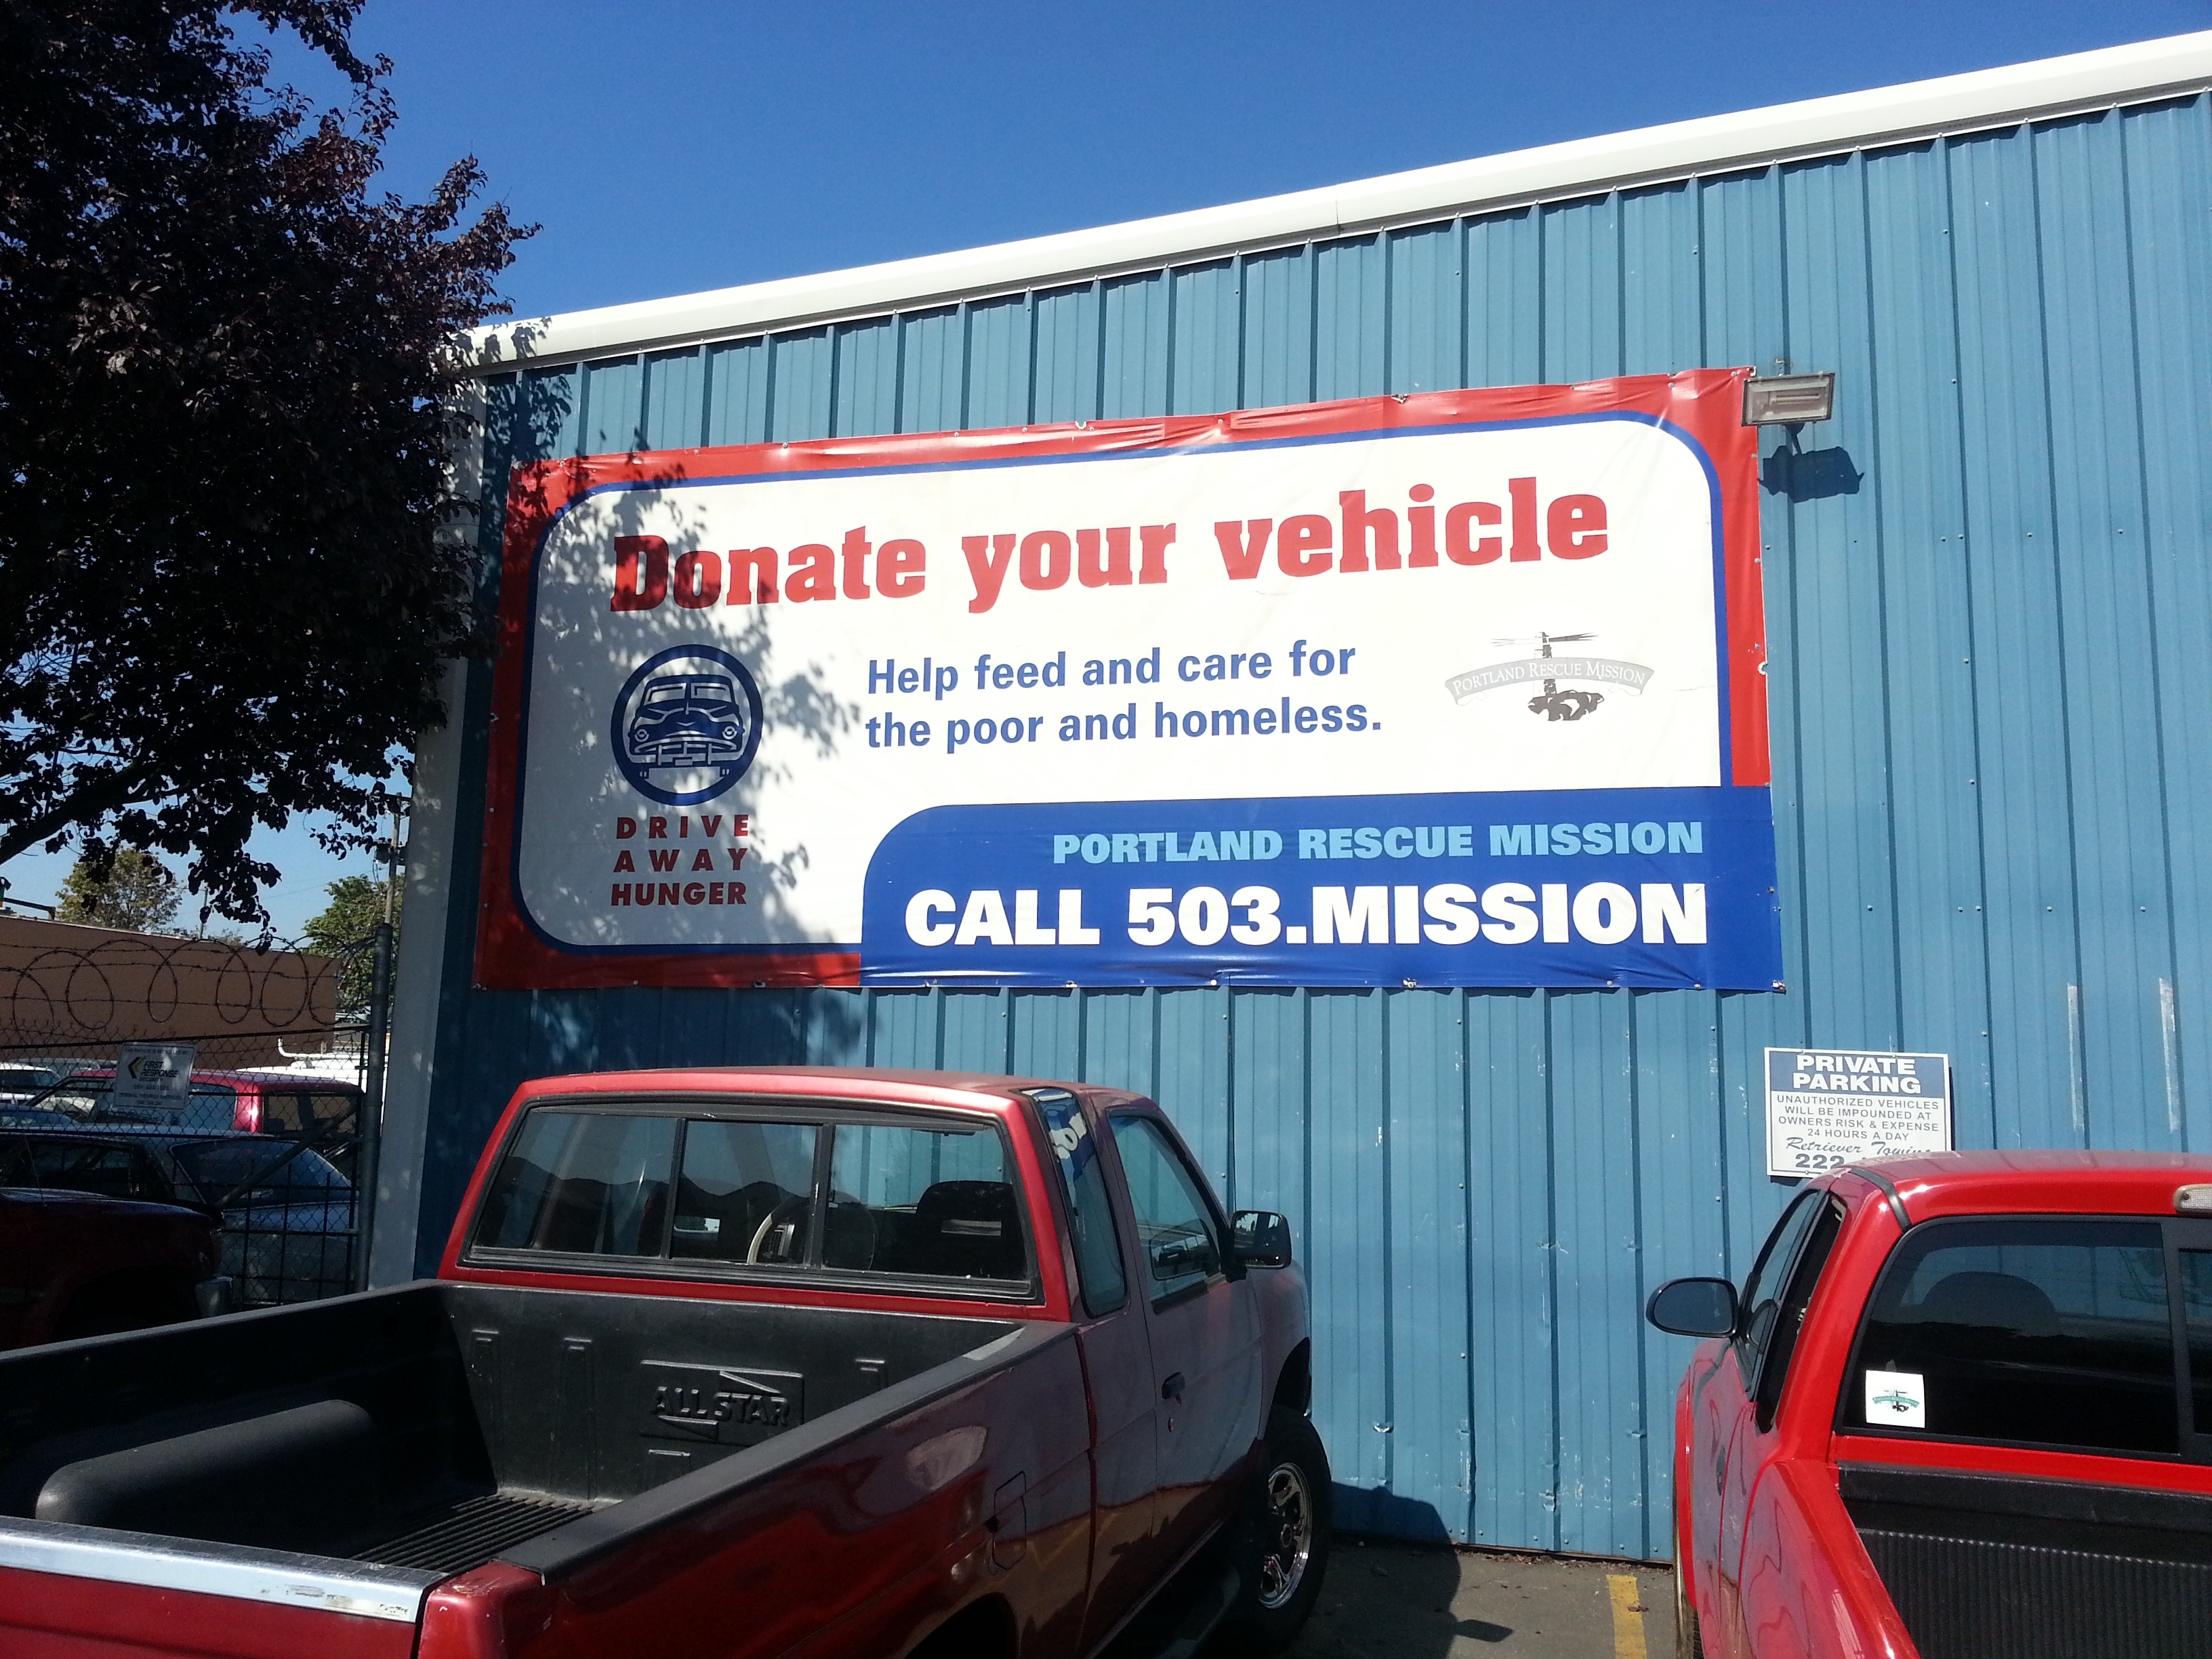 Portland Rescue Mission's Car Lot Helps Feed Homeless